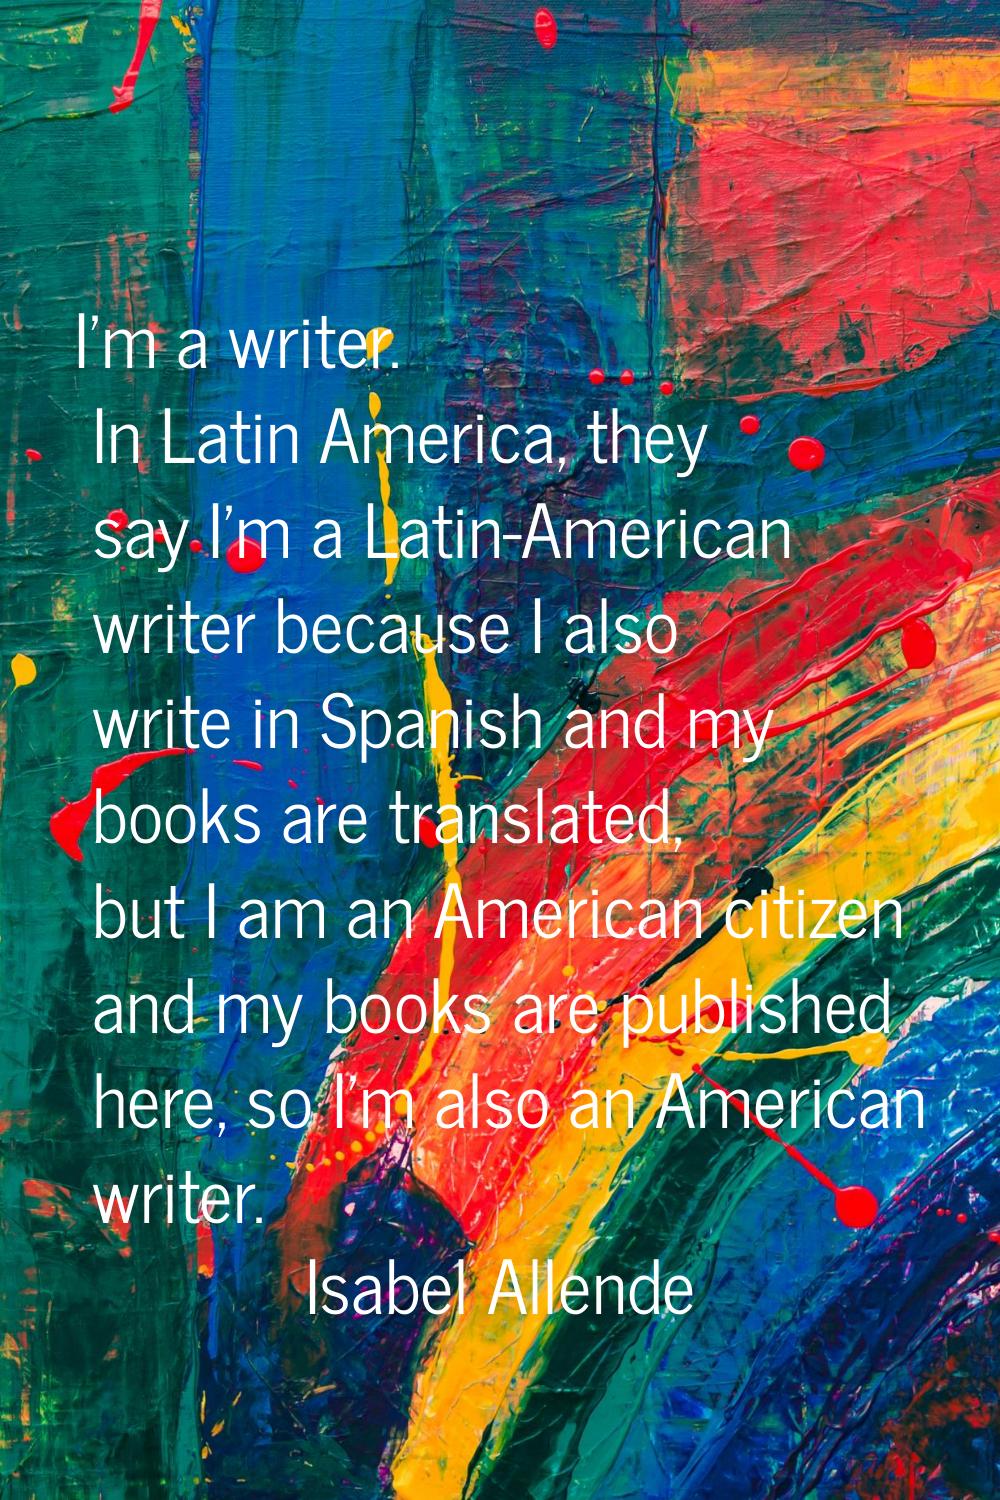 I'm a writer. In Latin America, they say I'm a Latin-American writer because I also write in Spanis